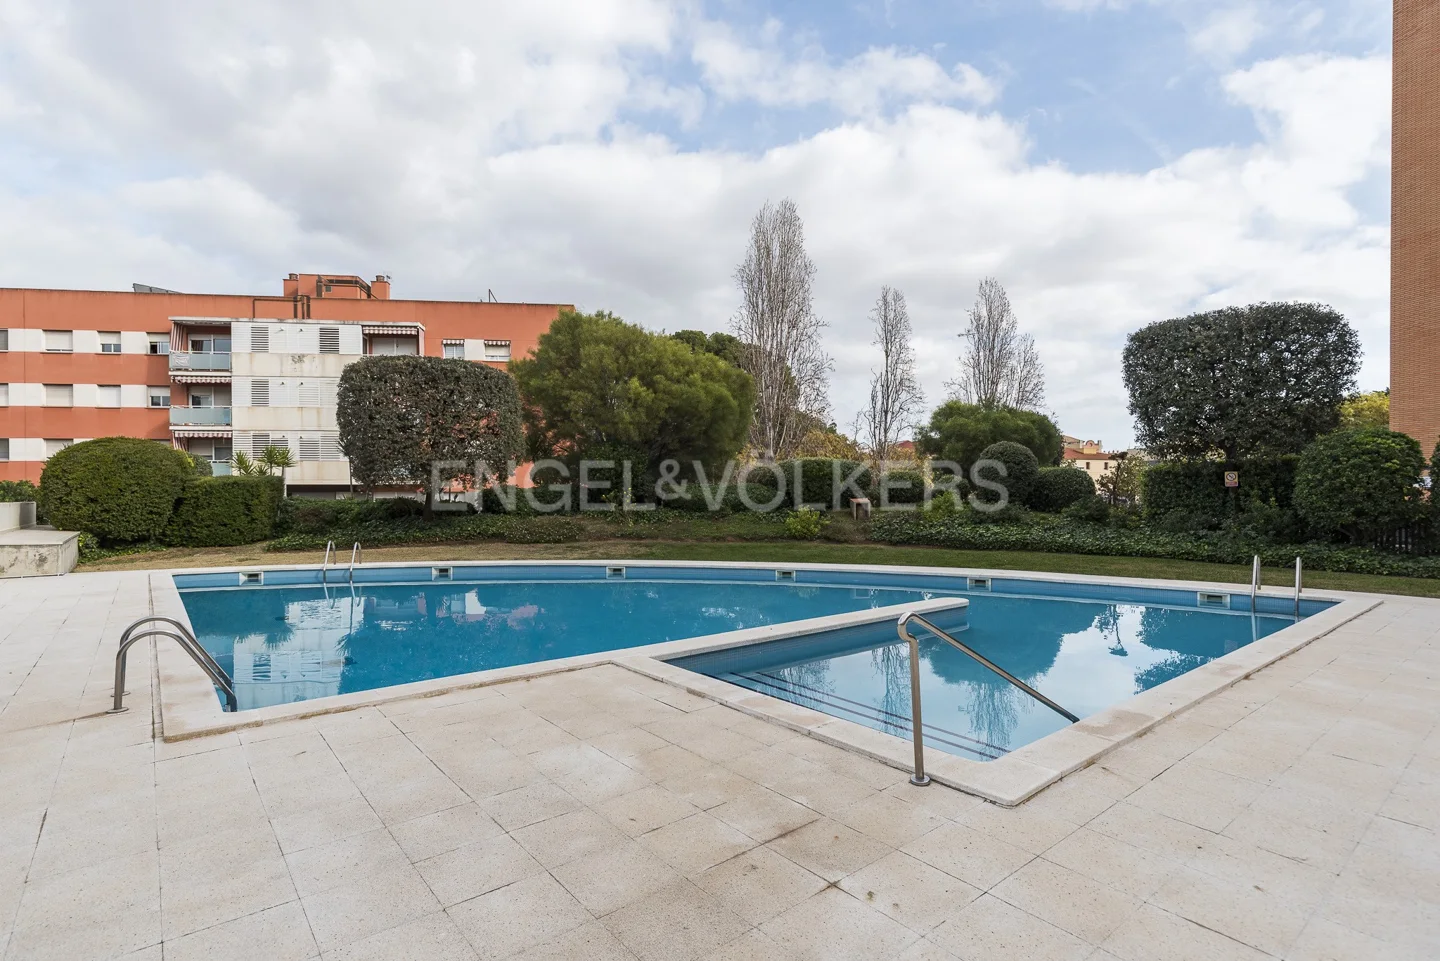 Flat with swimming pool and paddle tennis in Sant Joan Despí